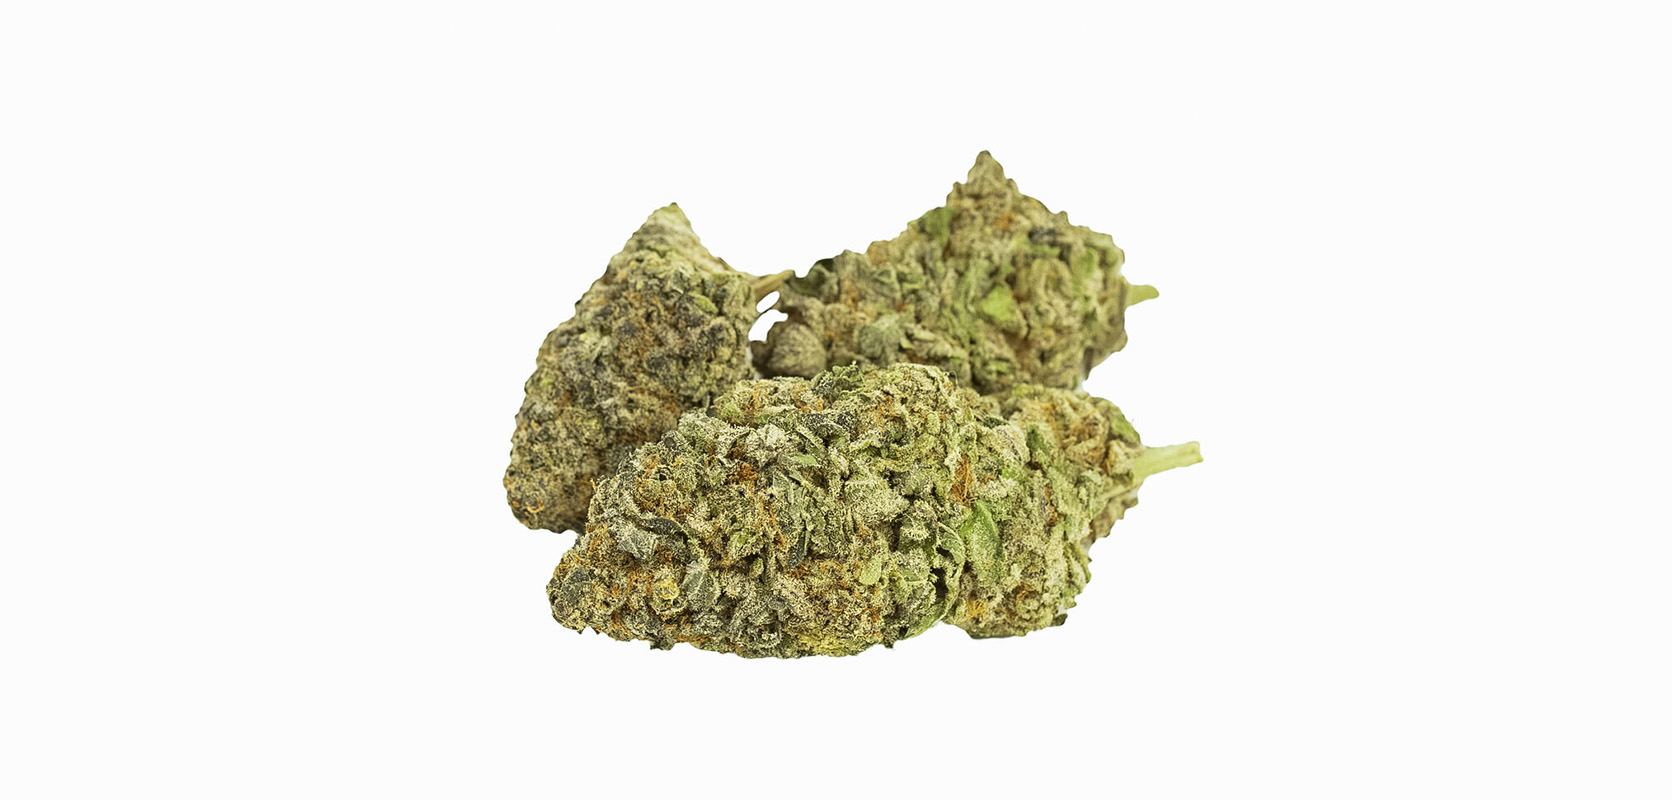 Comatose OG weed bud. Buy weed online in canada from cheap weed dispensary low price bud.